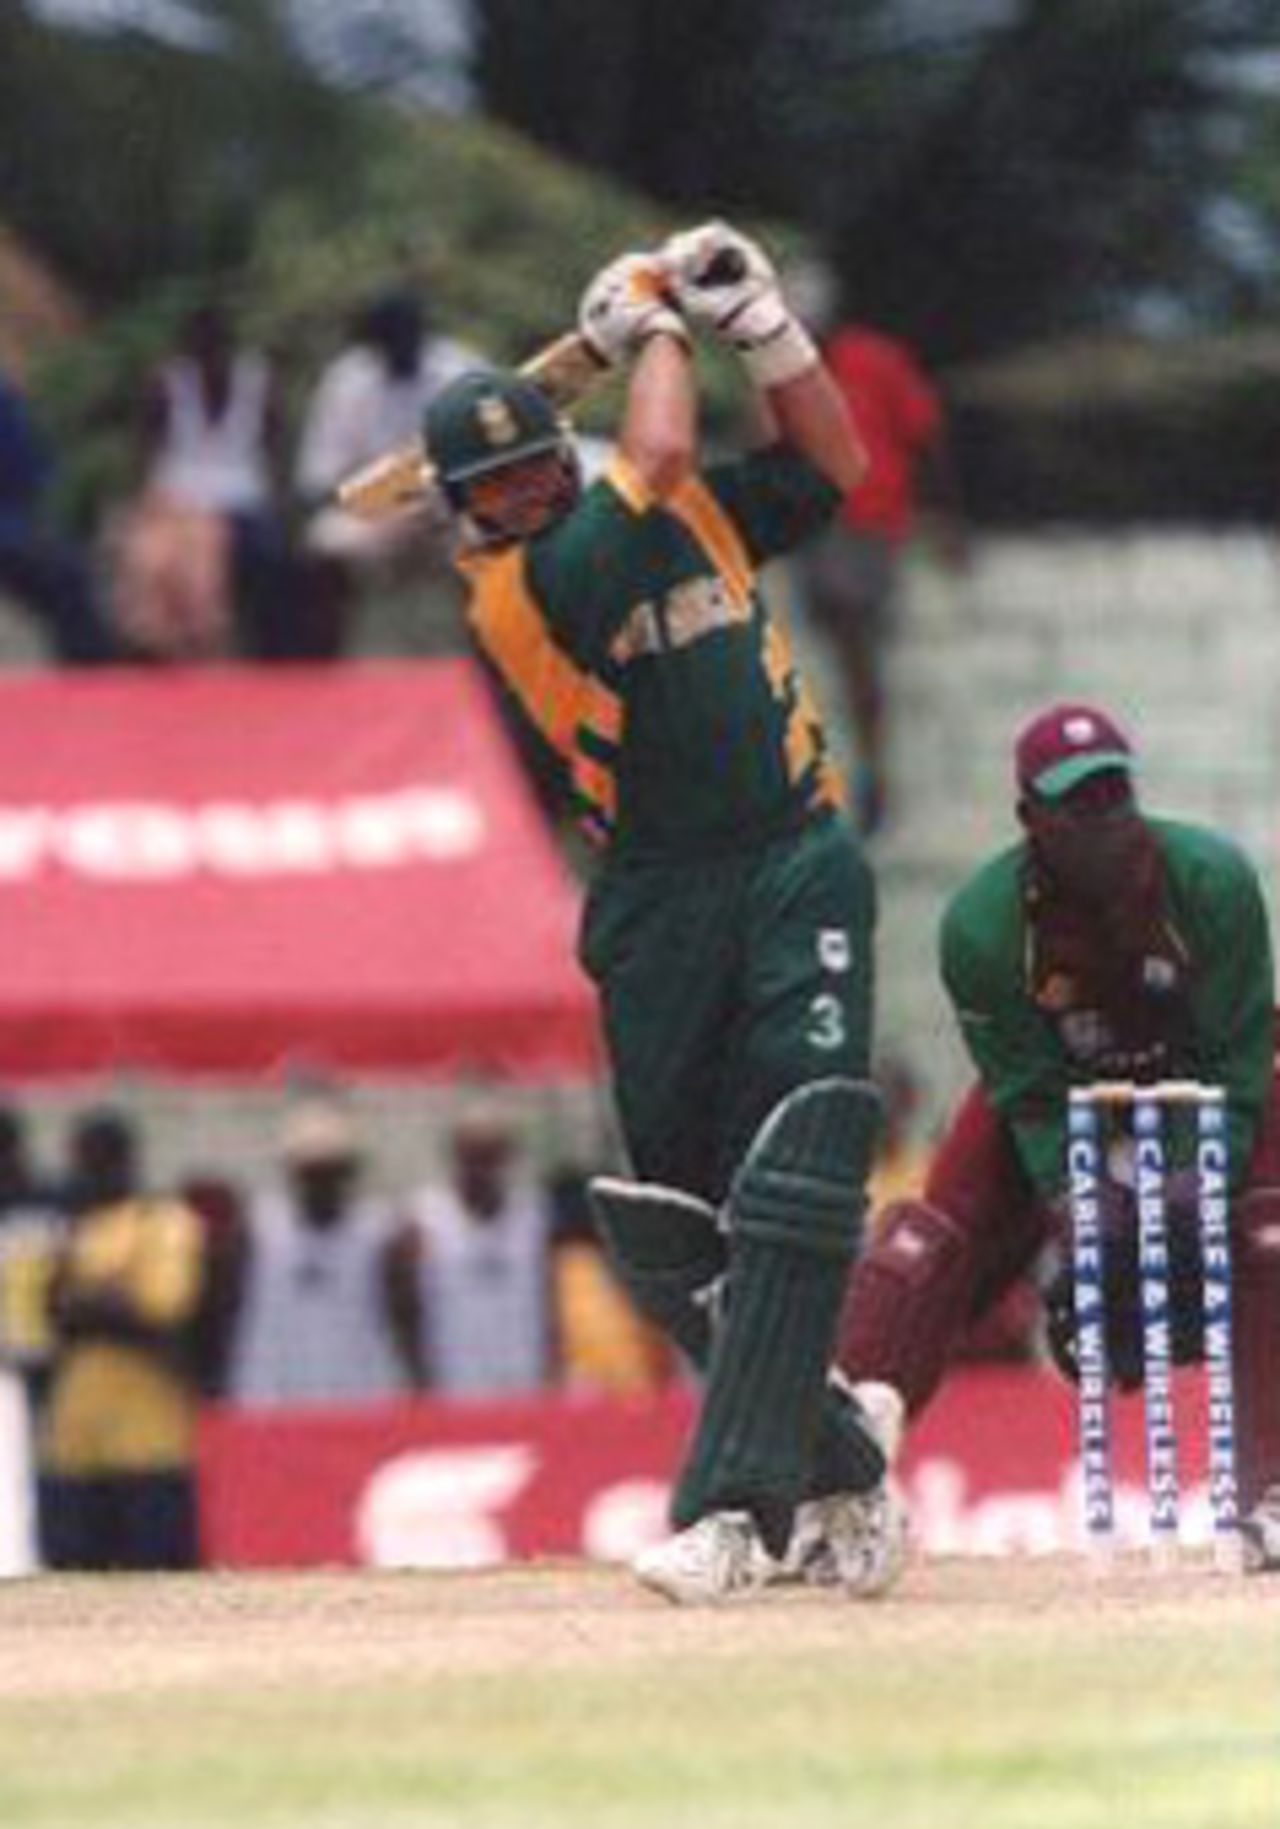 Kallis drives the ball, 7th ODI West Indies v South Africa, at Arnos Vale Ground, Kingstown, St Vincent, 16 May 2001